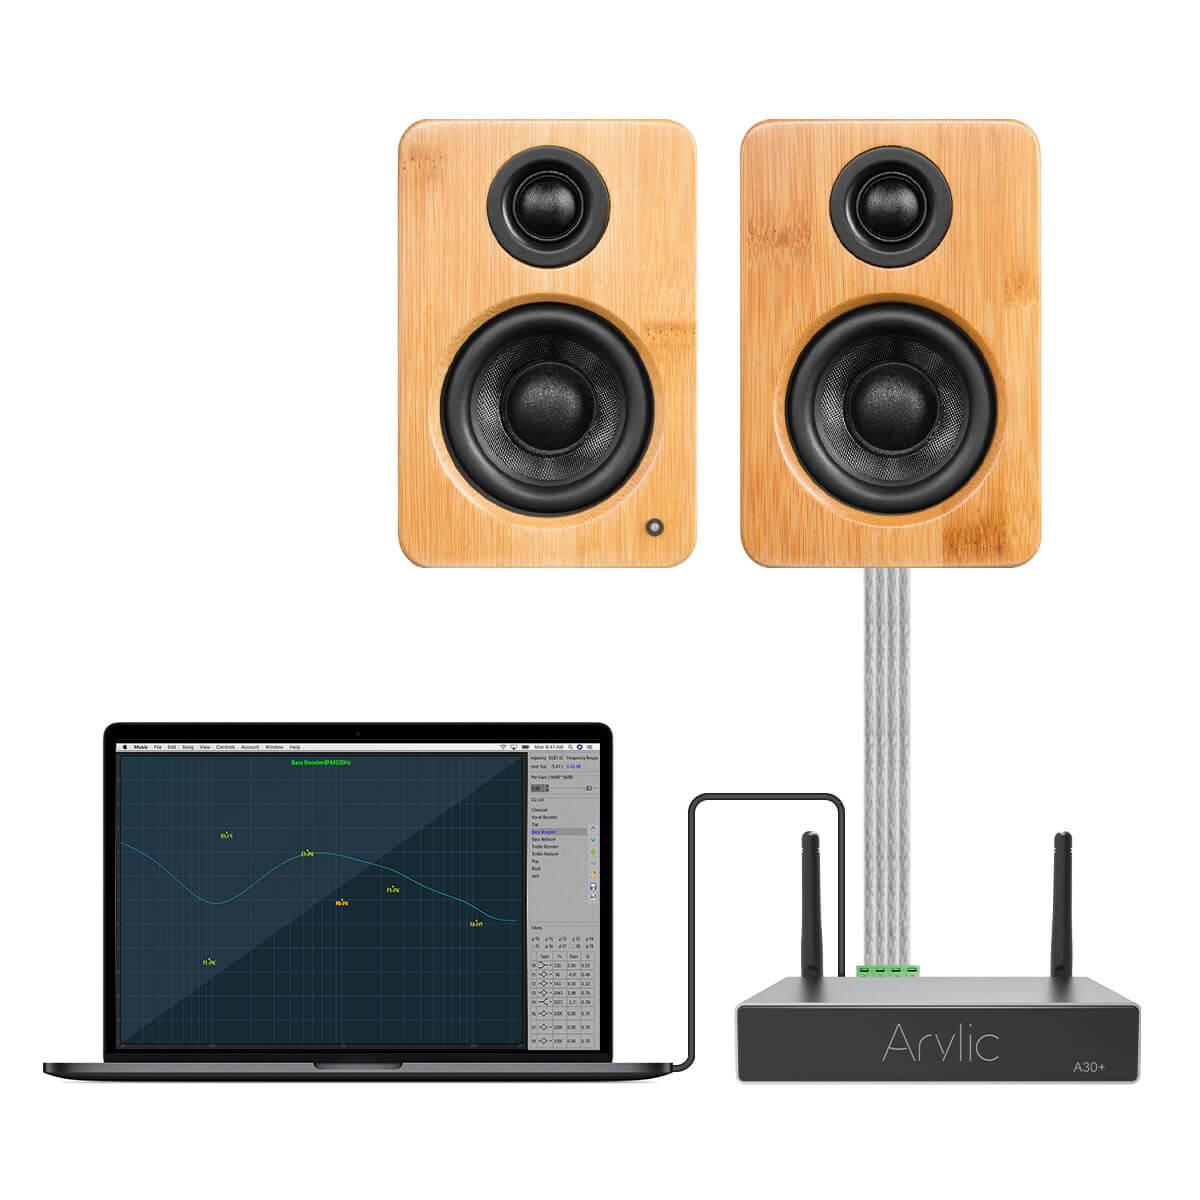 amp to speaker to computer monitor